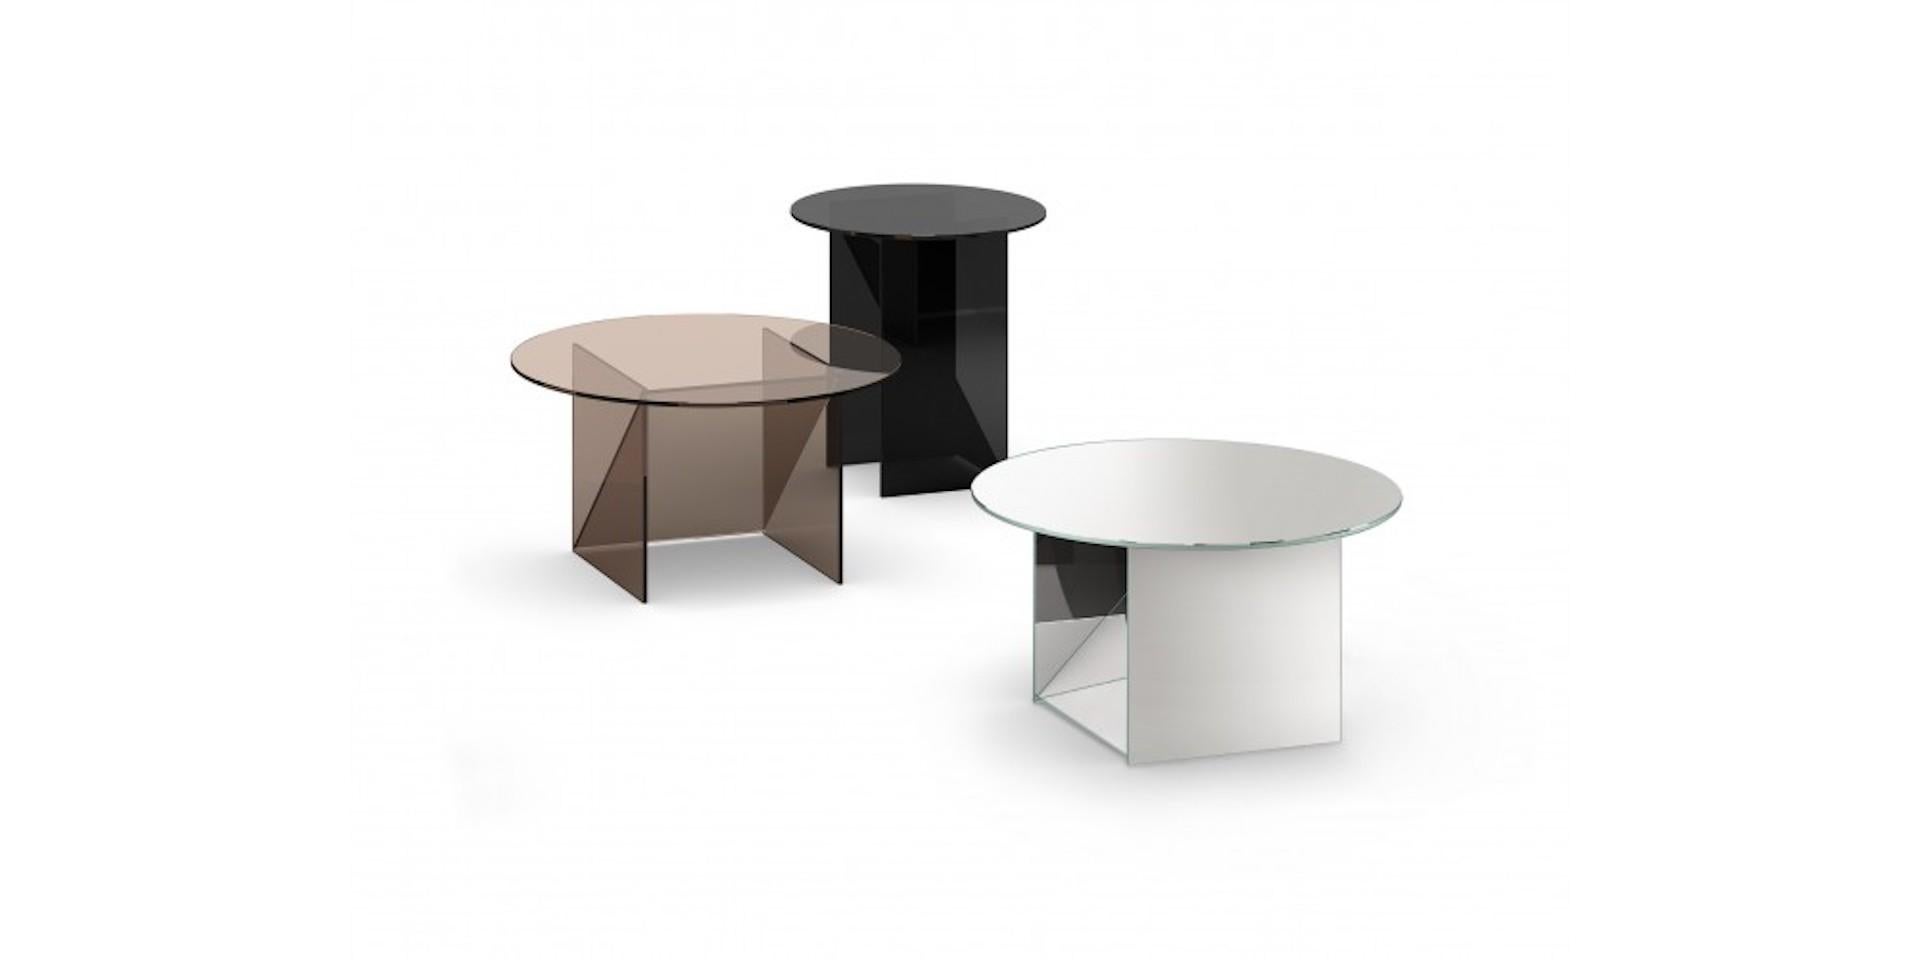 Inspired by art deco jewelry and industrial glass developments of the time, side tables KAISA illustrate sculptural elegance with abstractions in faceted and linear forms. Designed by industrial designer and goldsmith Annabelle Klute, KAISA side